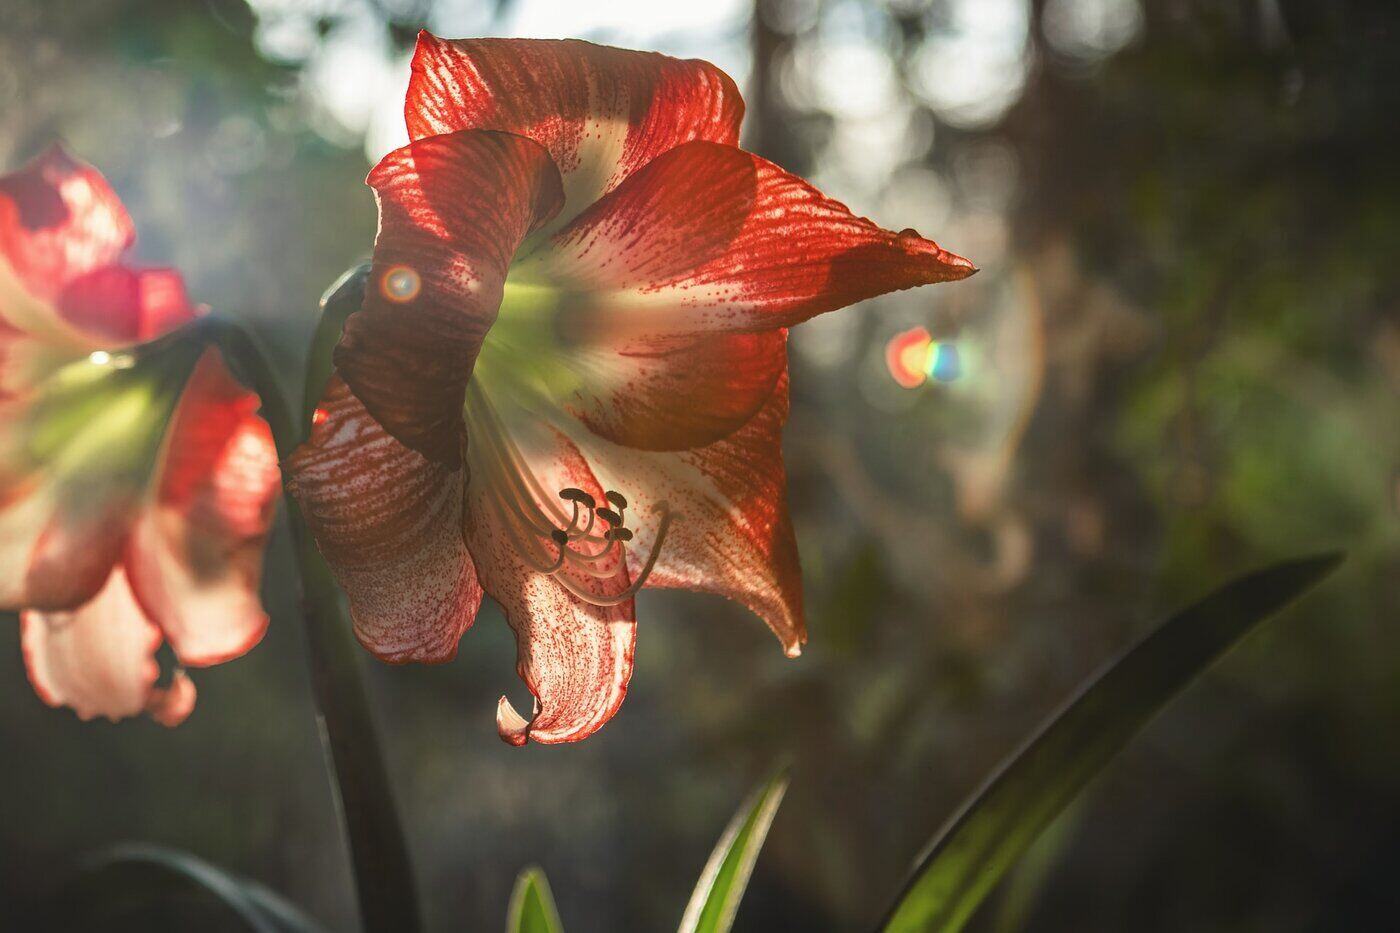 red and white striped amaryllis - all about amaryllis flowers and their different colors